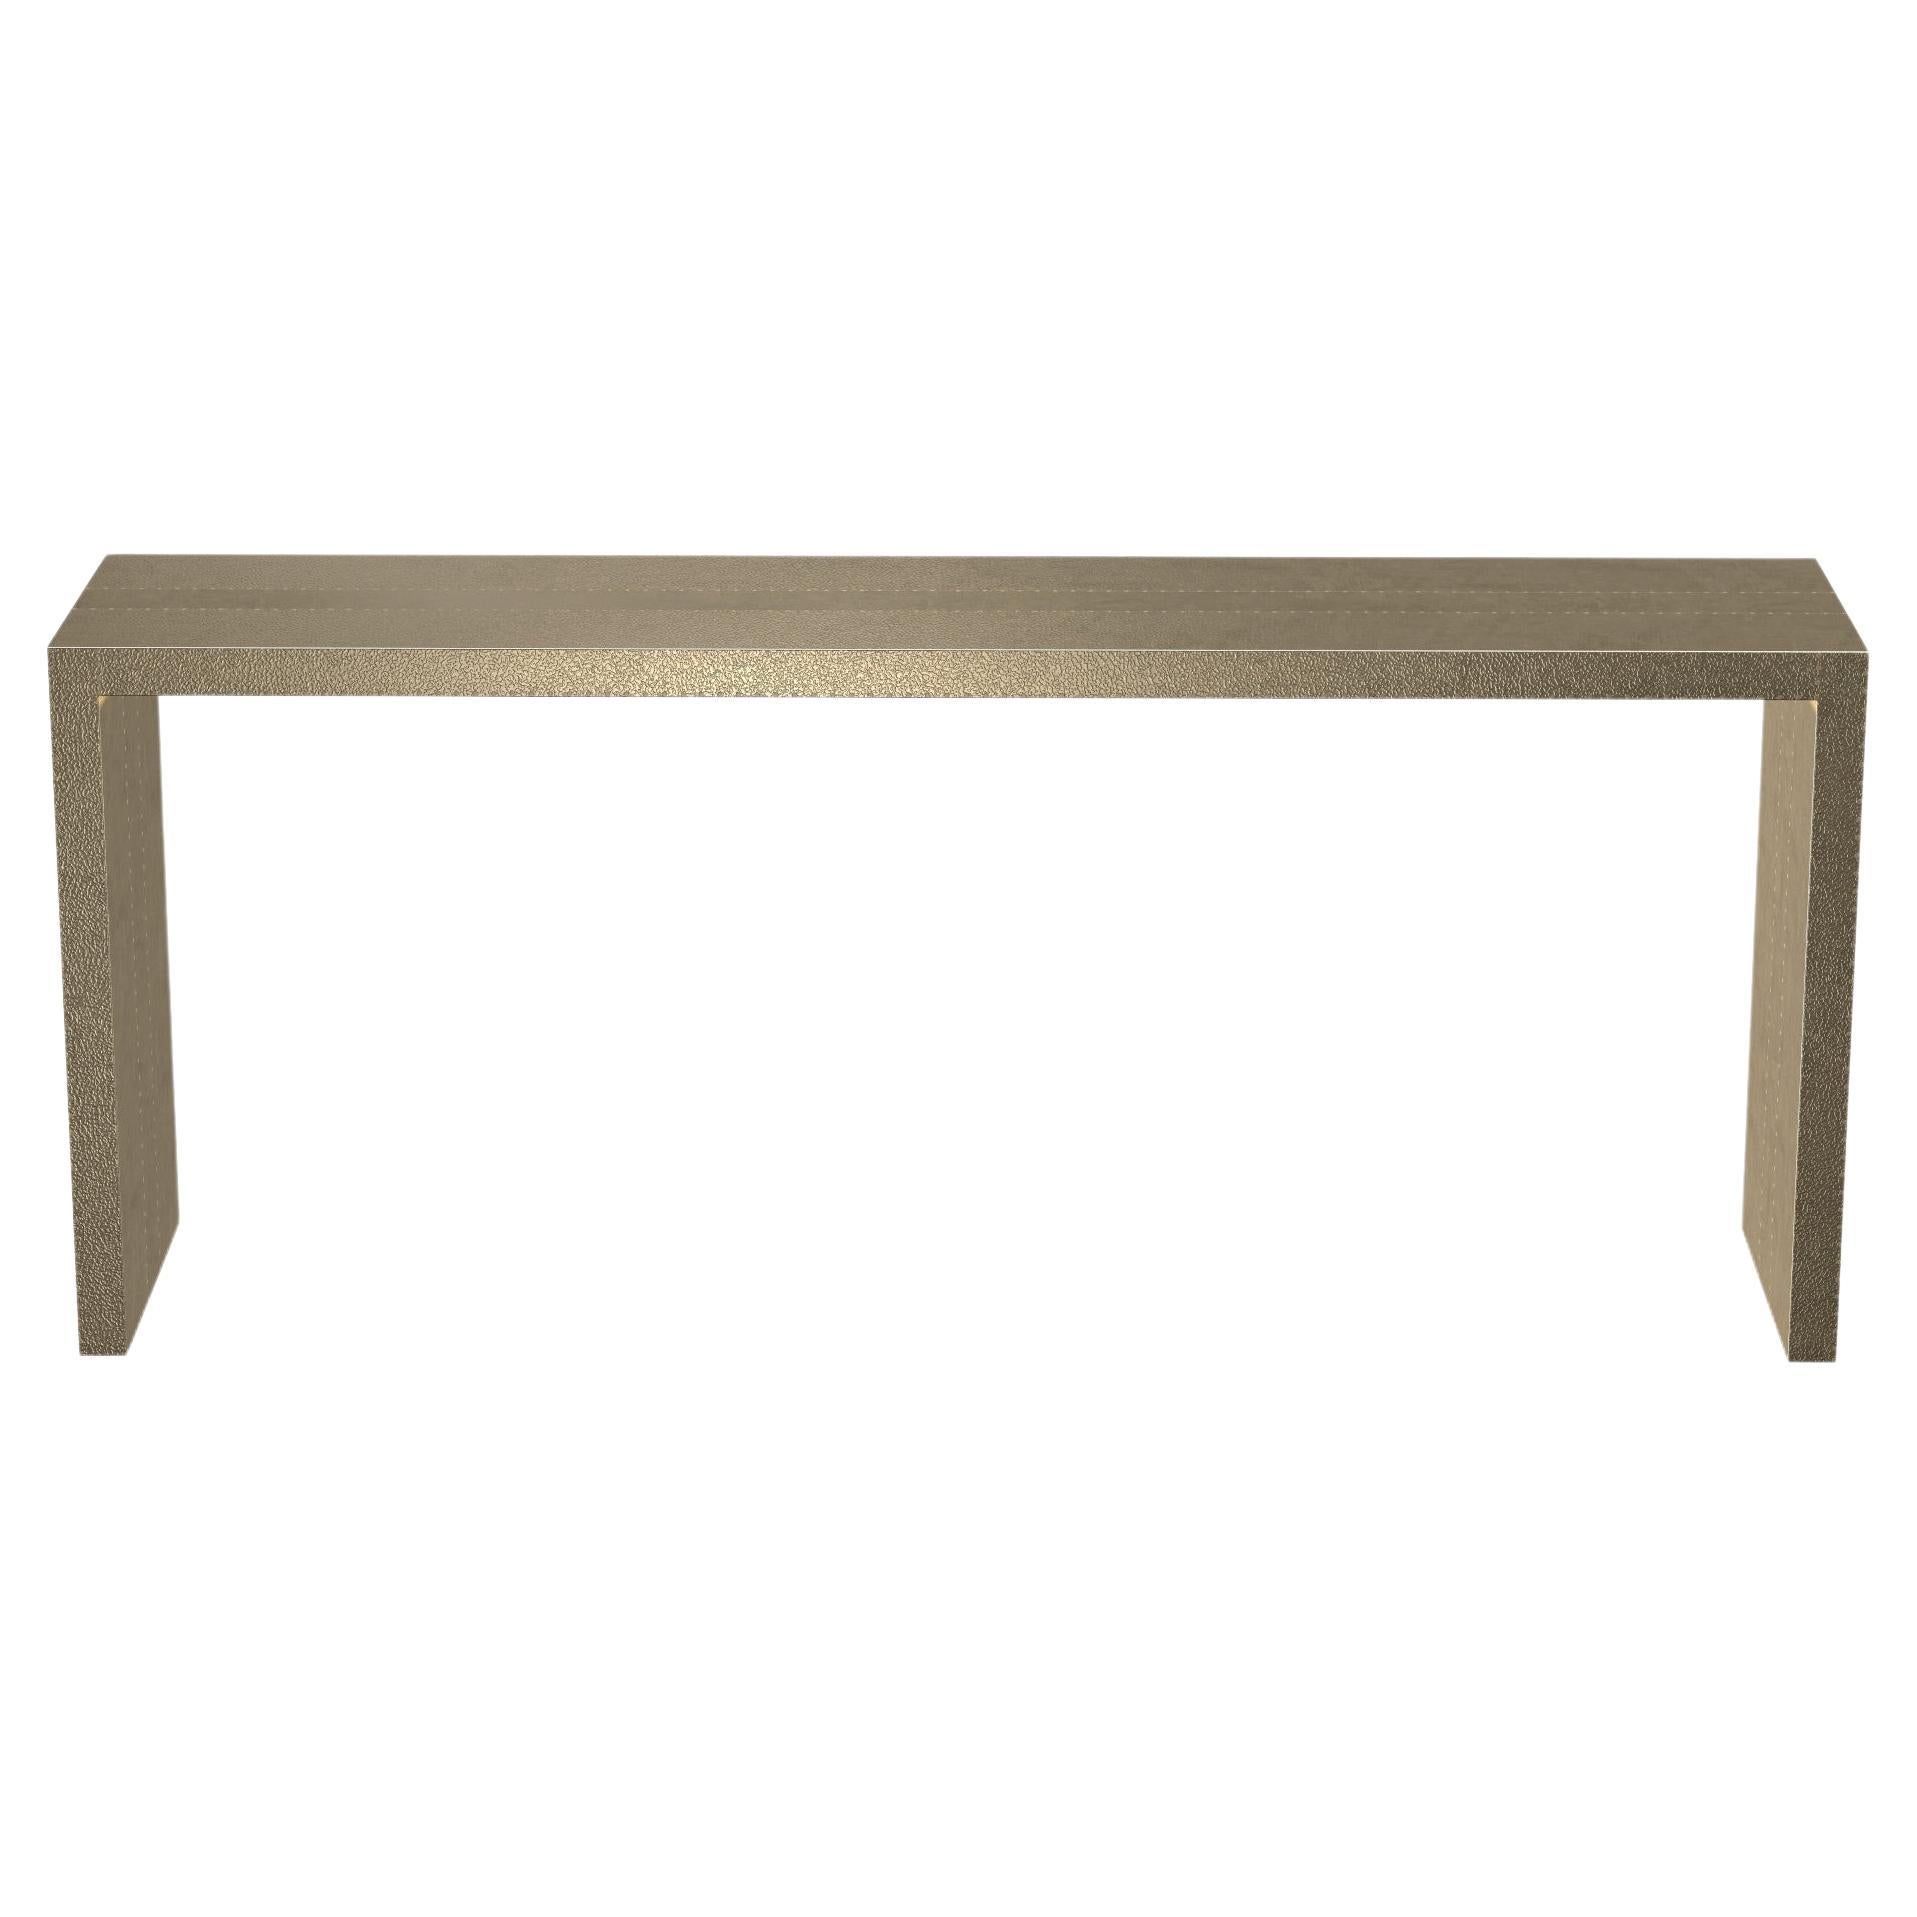 Art Deco Industrial and Work Console Tables in Copper Fine Hammered  by Alison S